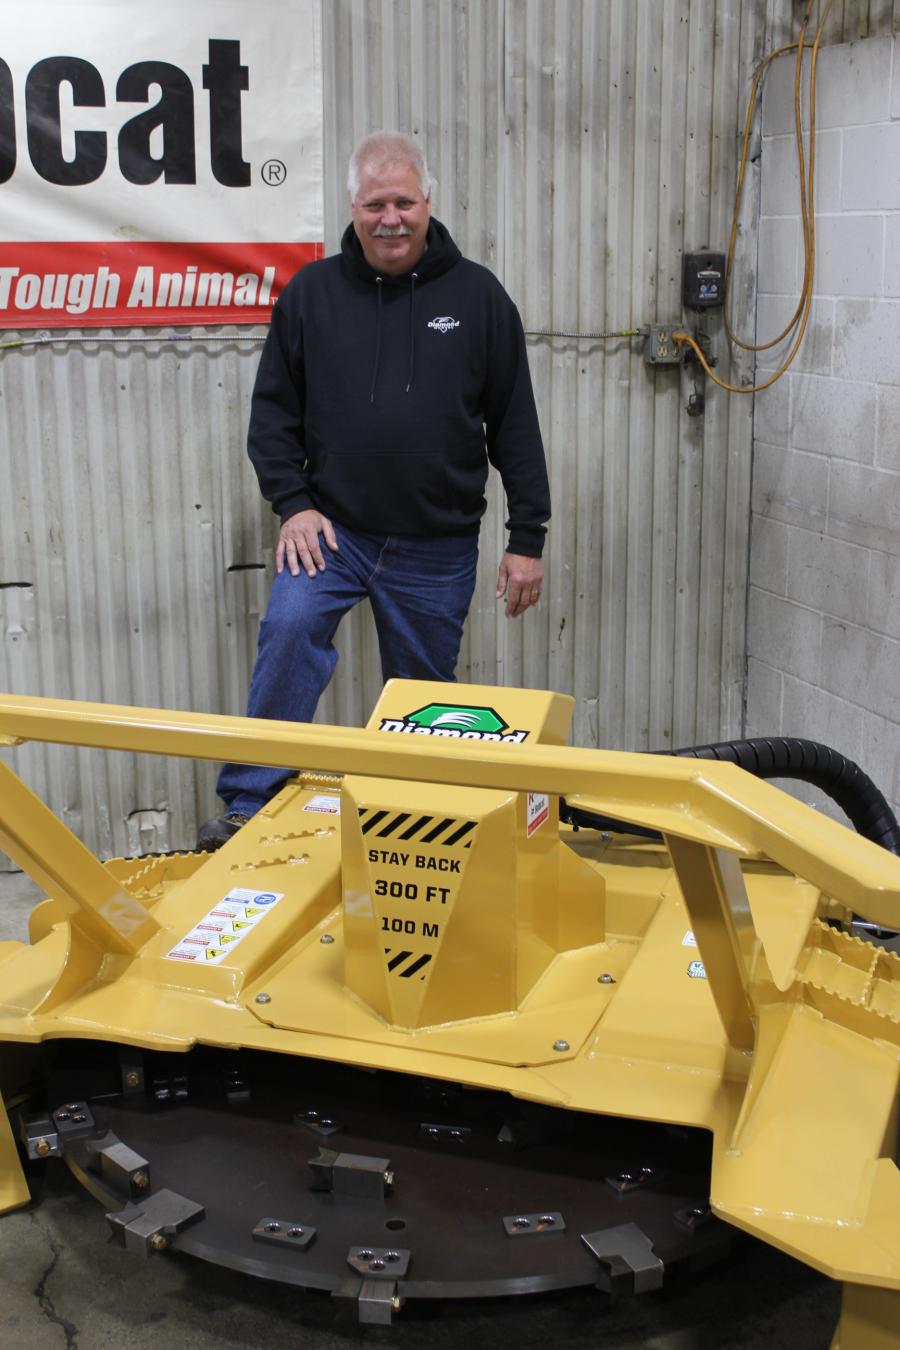 Paul Schreurs, regional sales manager of Diamond Mowers, with the SK Disc Mulcher Pro X at the St. Cloud event. This mulcher grinds down trees and brush efficiently and reliably. This attachment is available in a 48- or 60-in. cutting width and can mulch trees up to 6-in. in diameter.
(CEG photo)